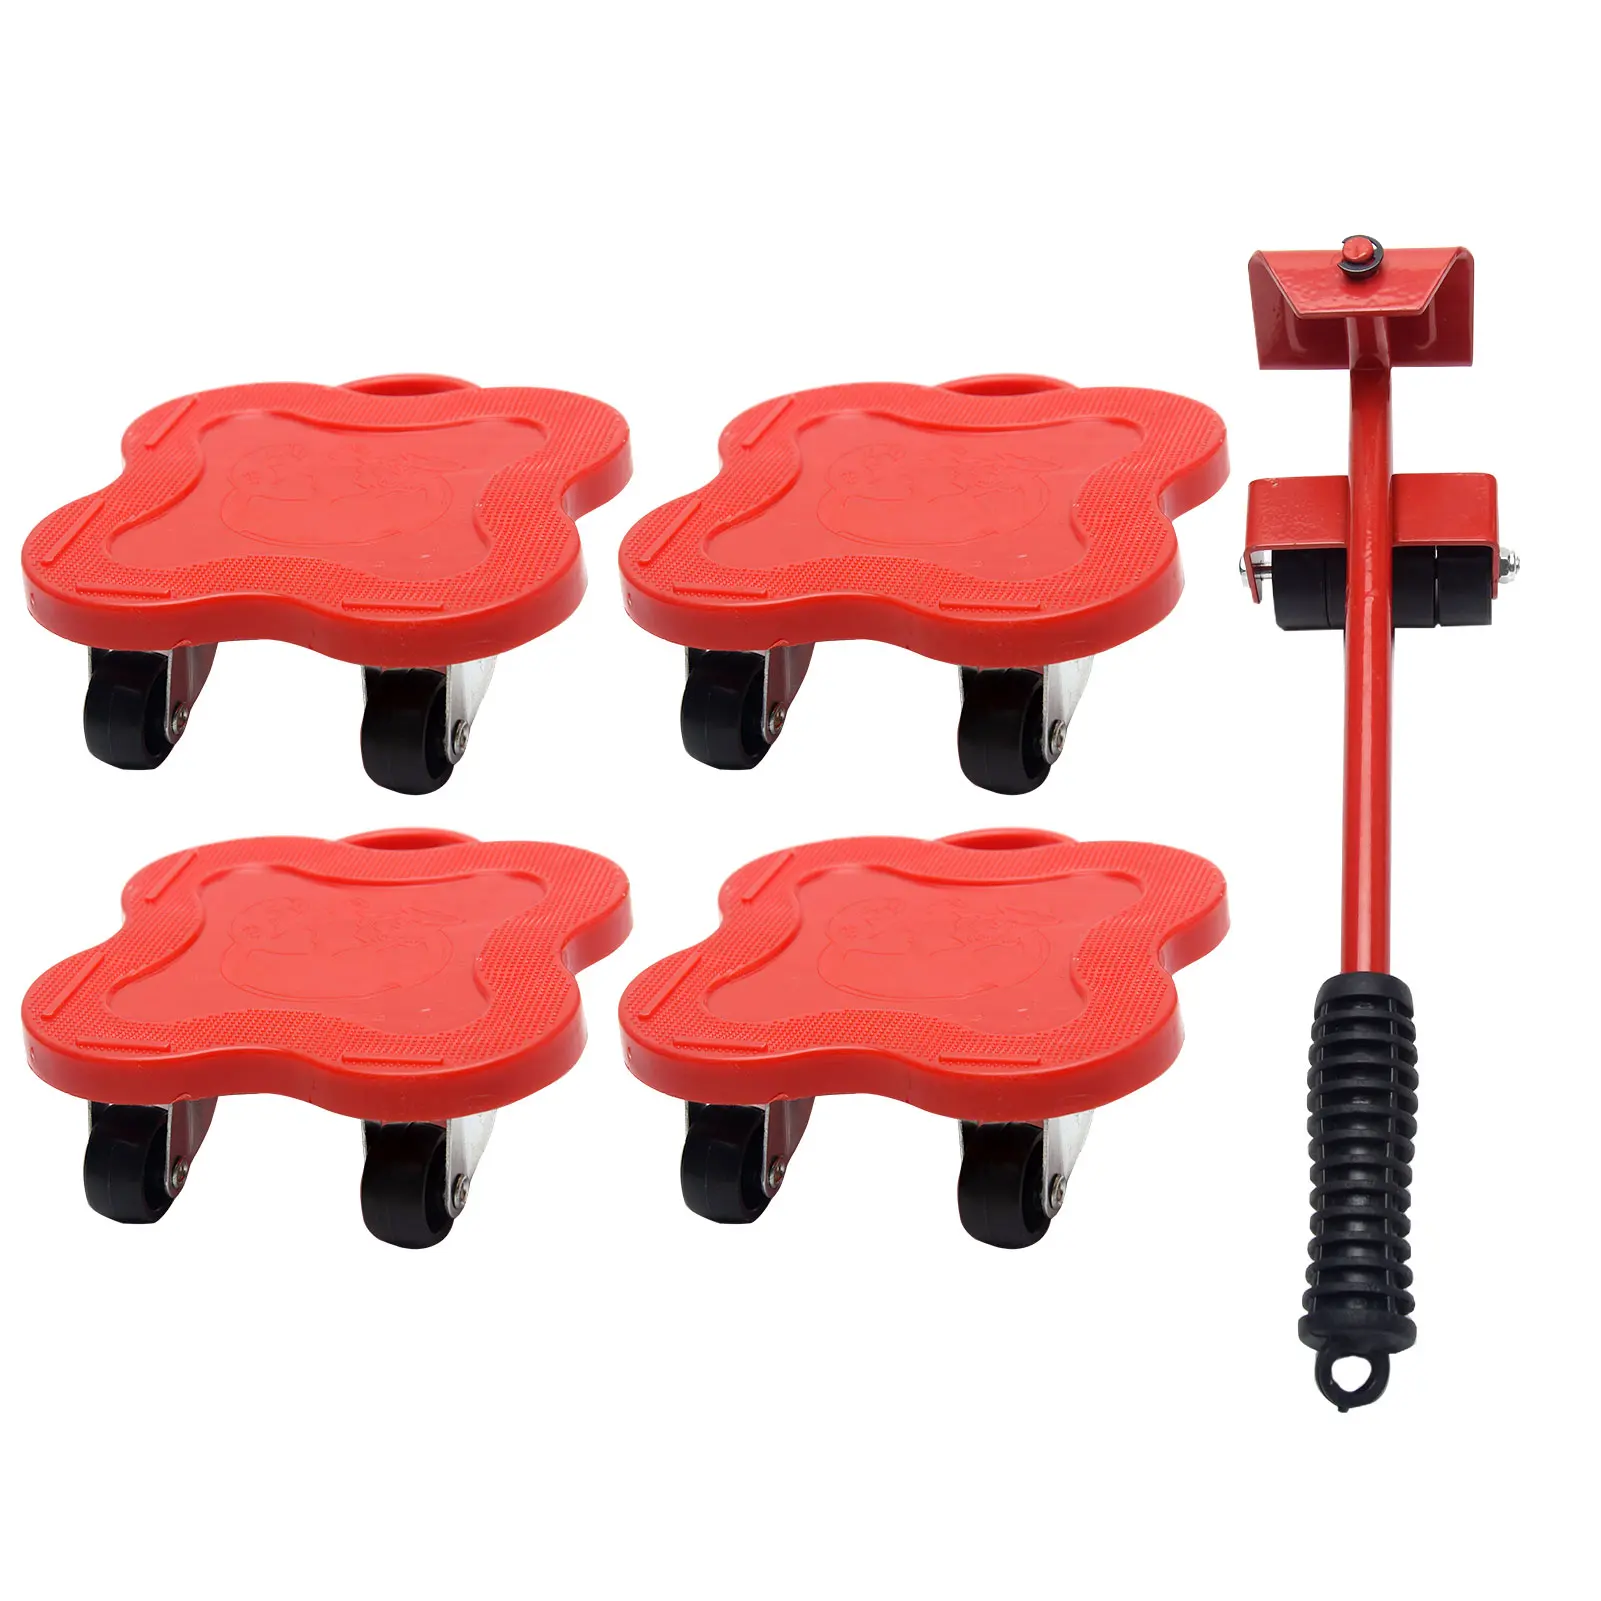 

5pcs Couches Mover Tool Heavy Stuffs Roller For Sofas 360 Rotatable Lifter Refrigerators Appliance Furniture Slides Kit Home Bed